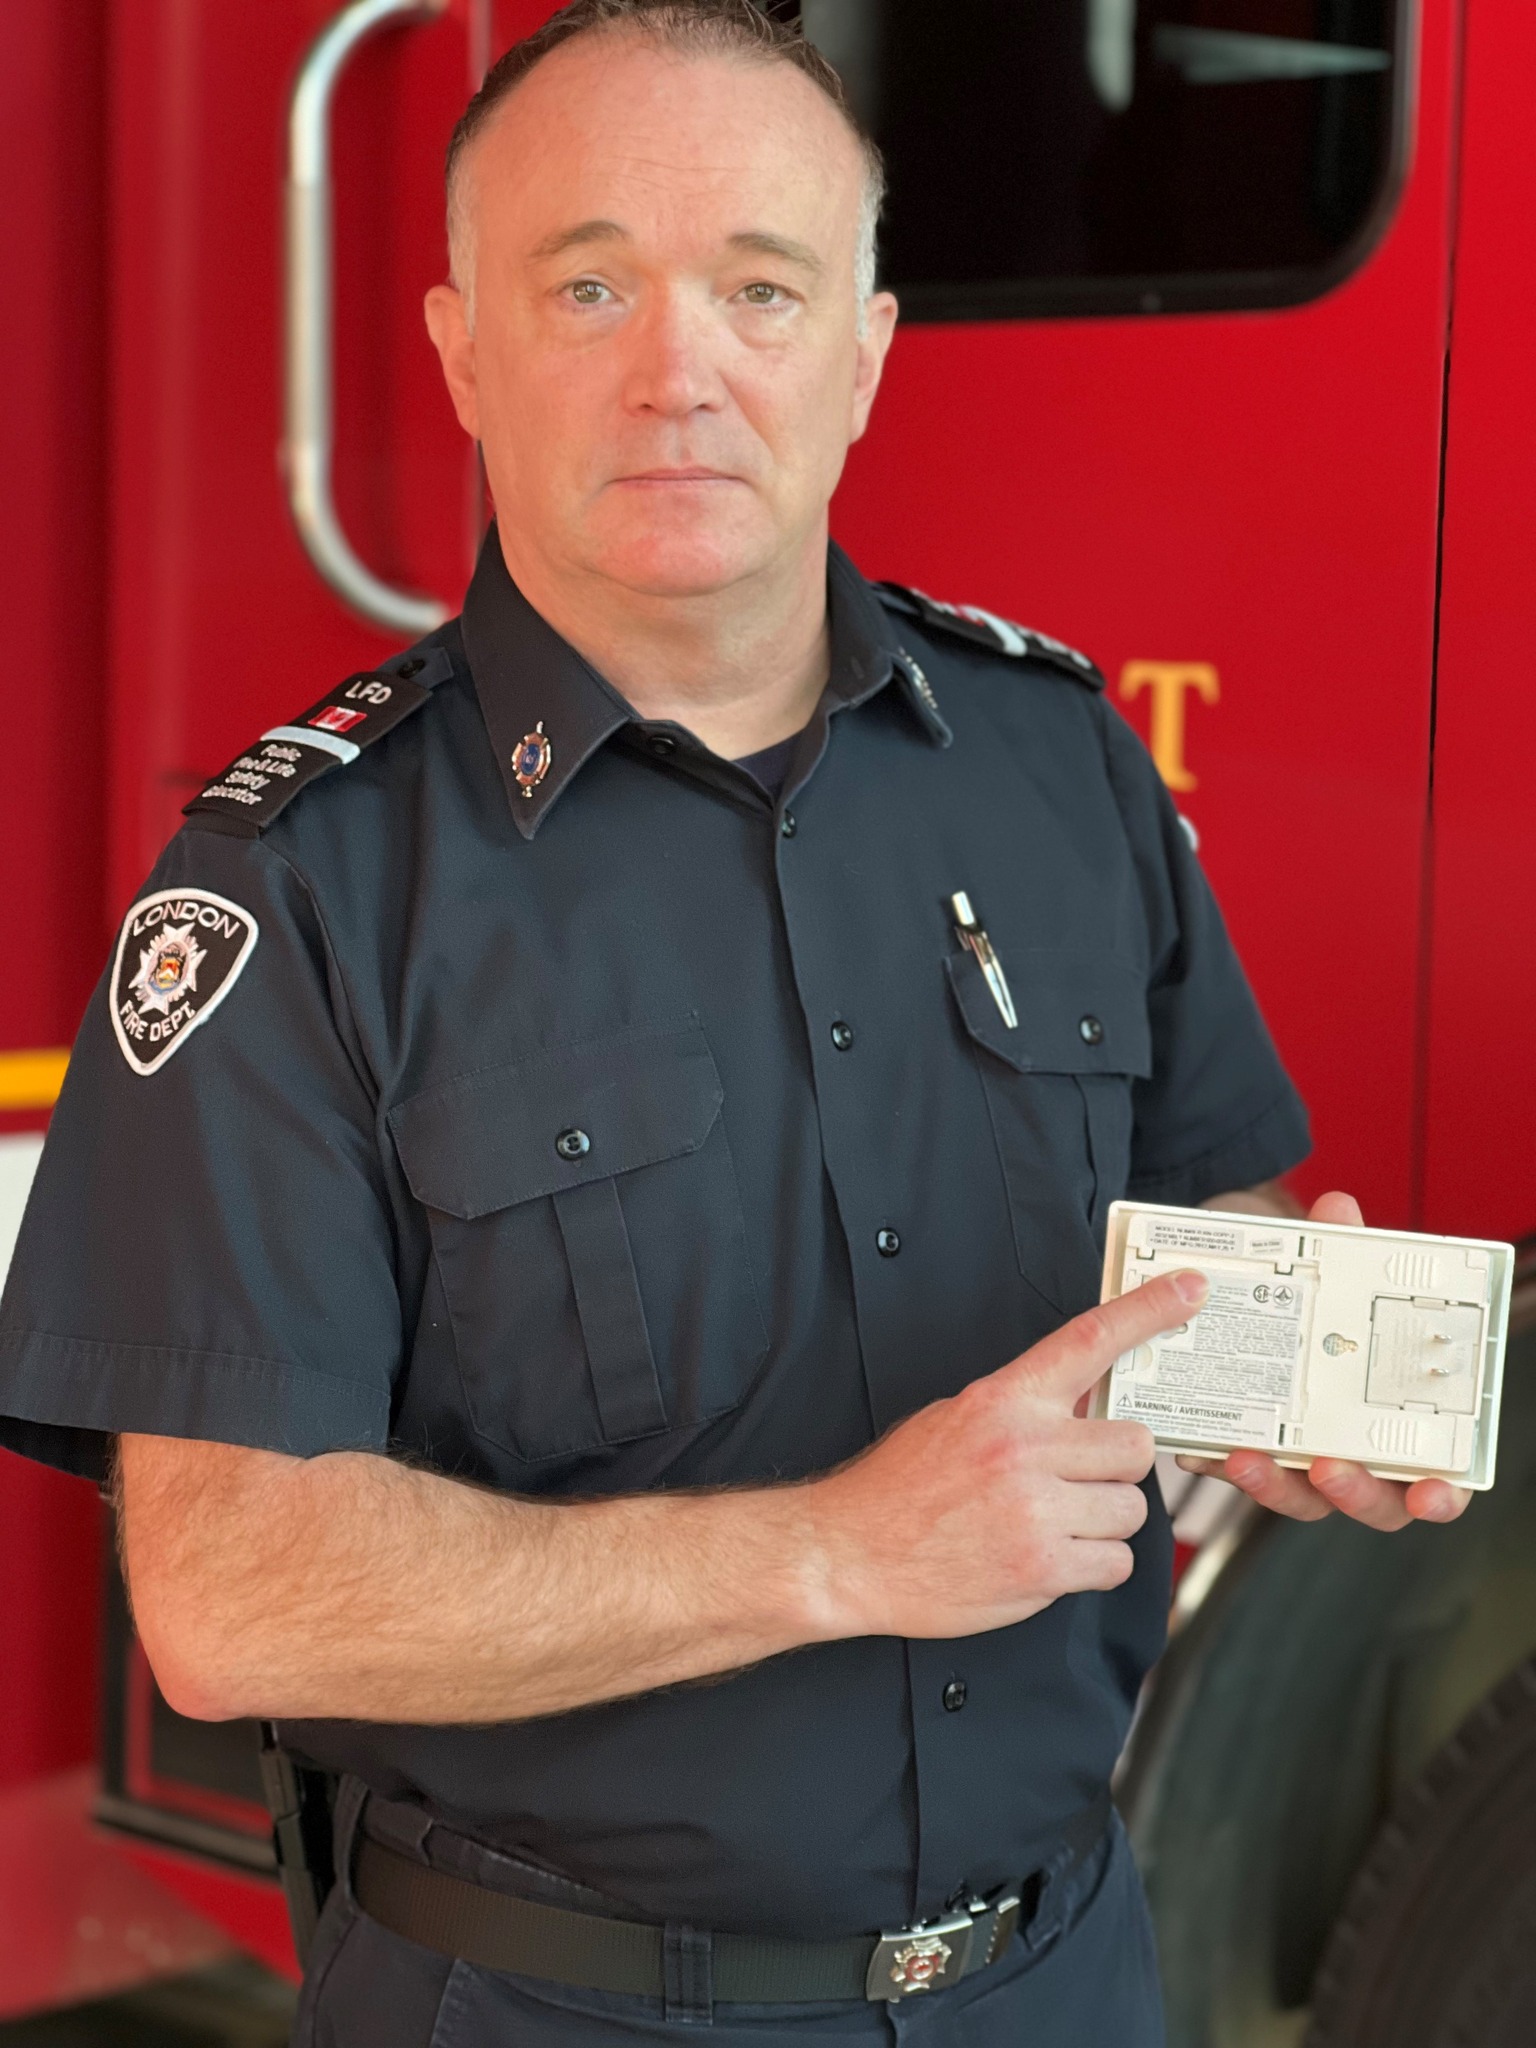 Public Fire & Life Safety Educator Poole reminds you to check your smoke & CO alarms